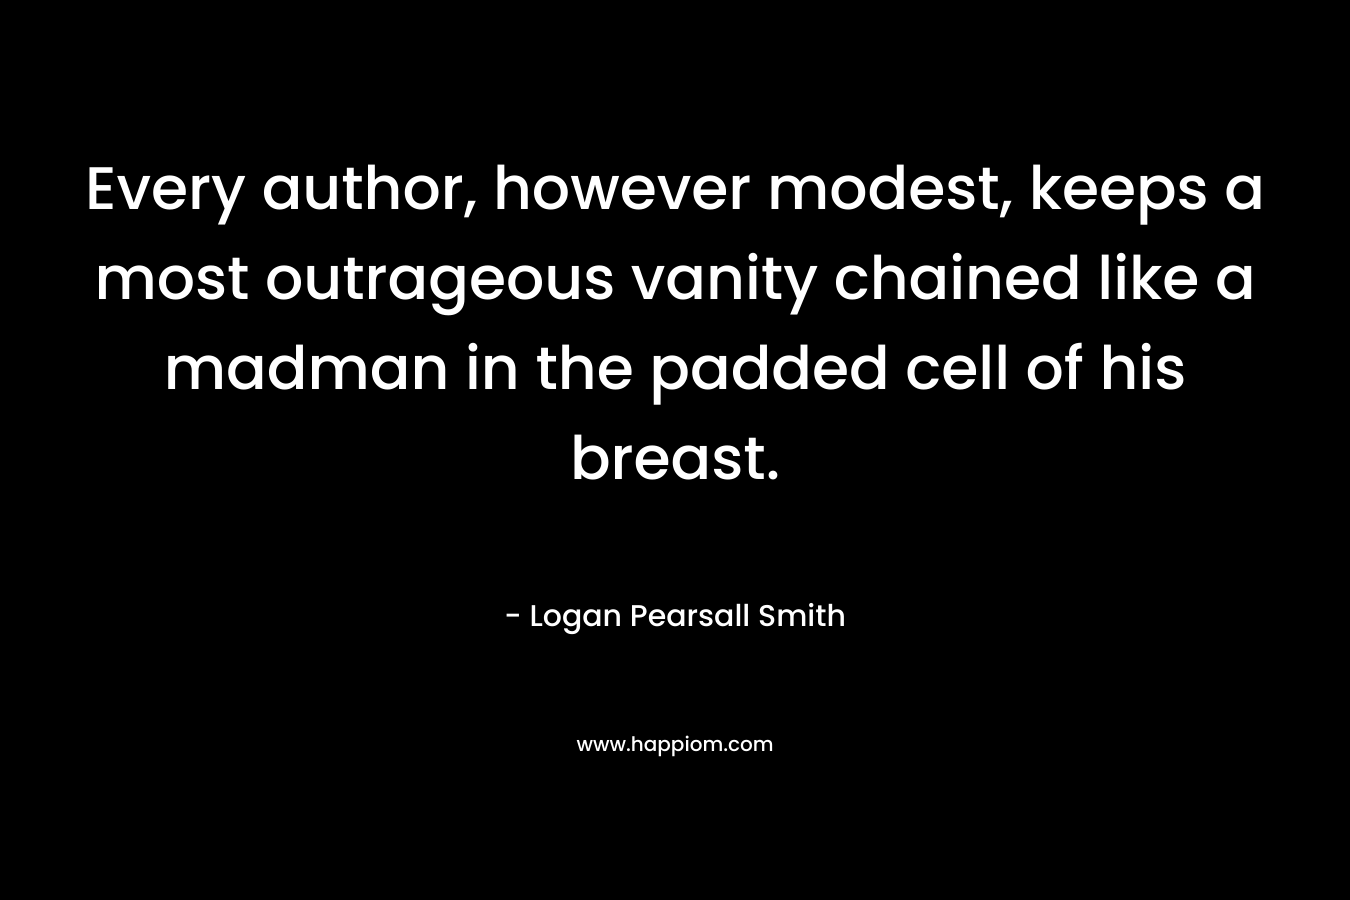 Every author, however modest, keeps a most outrageous vanity chained like a madman in the padded cell of his breast. – Logan Pearsall Smith